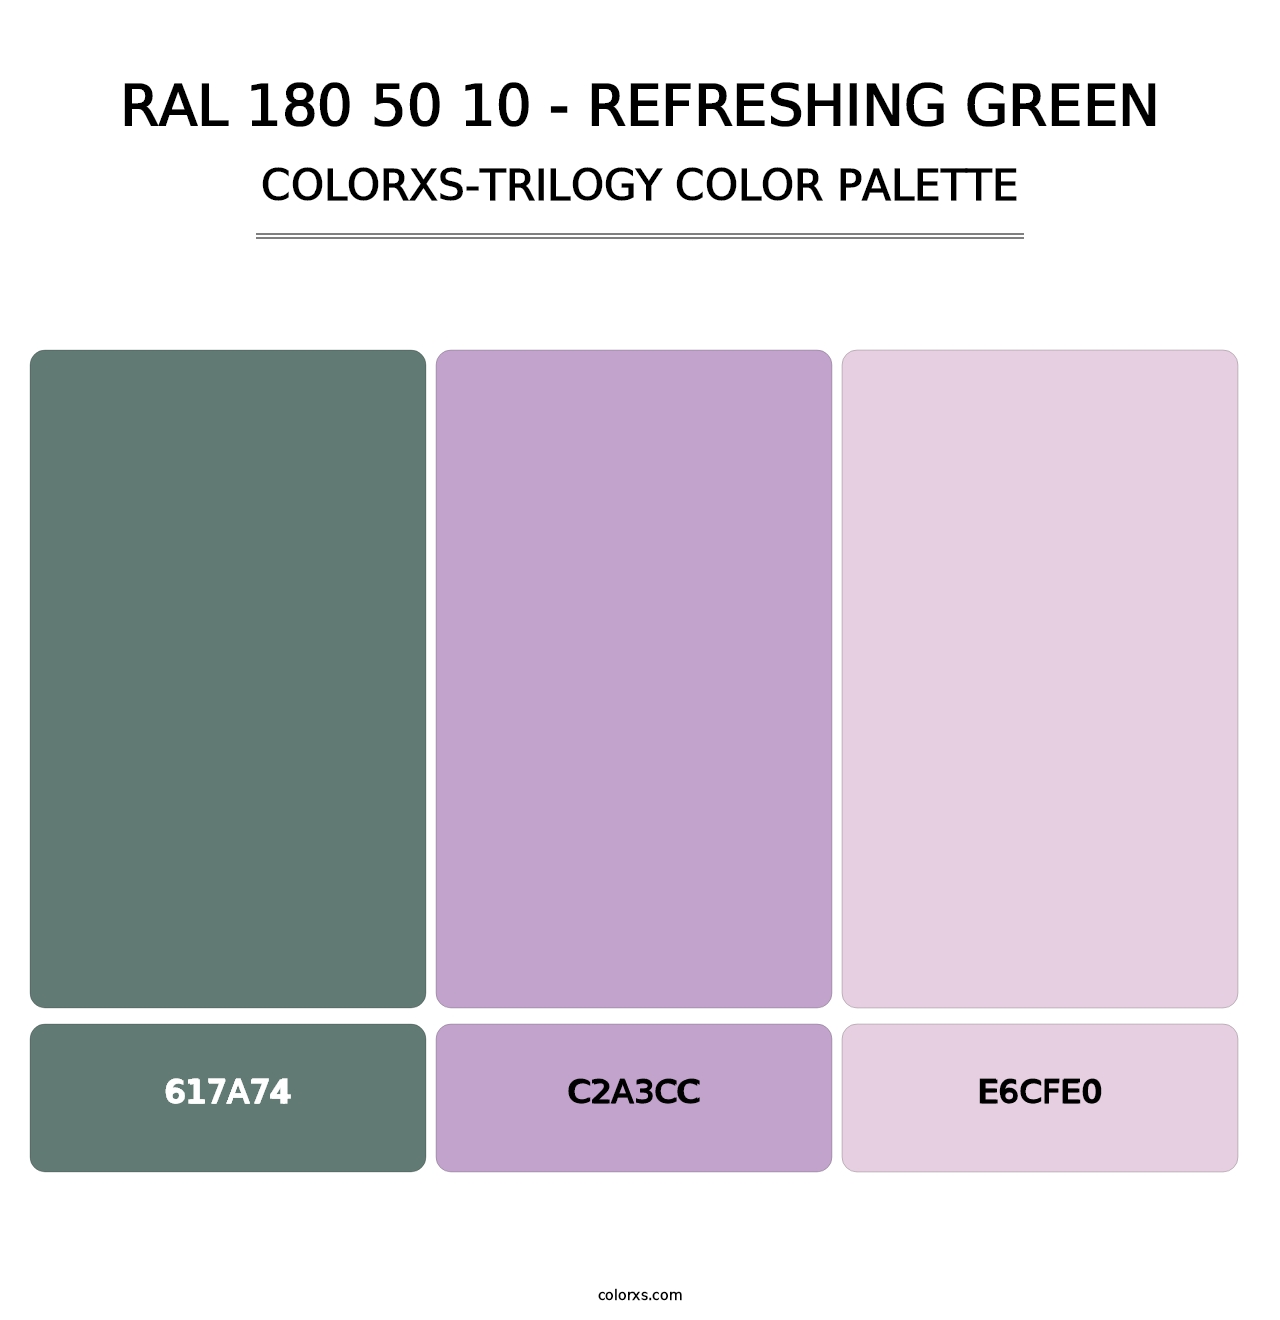 RAL 180 50 10 - Refreshing Green - Colorxs Trilogy Palette